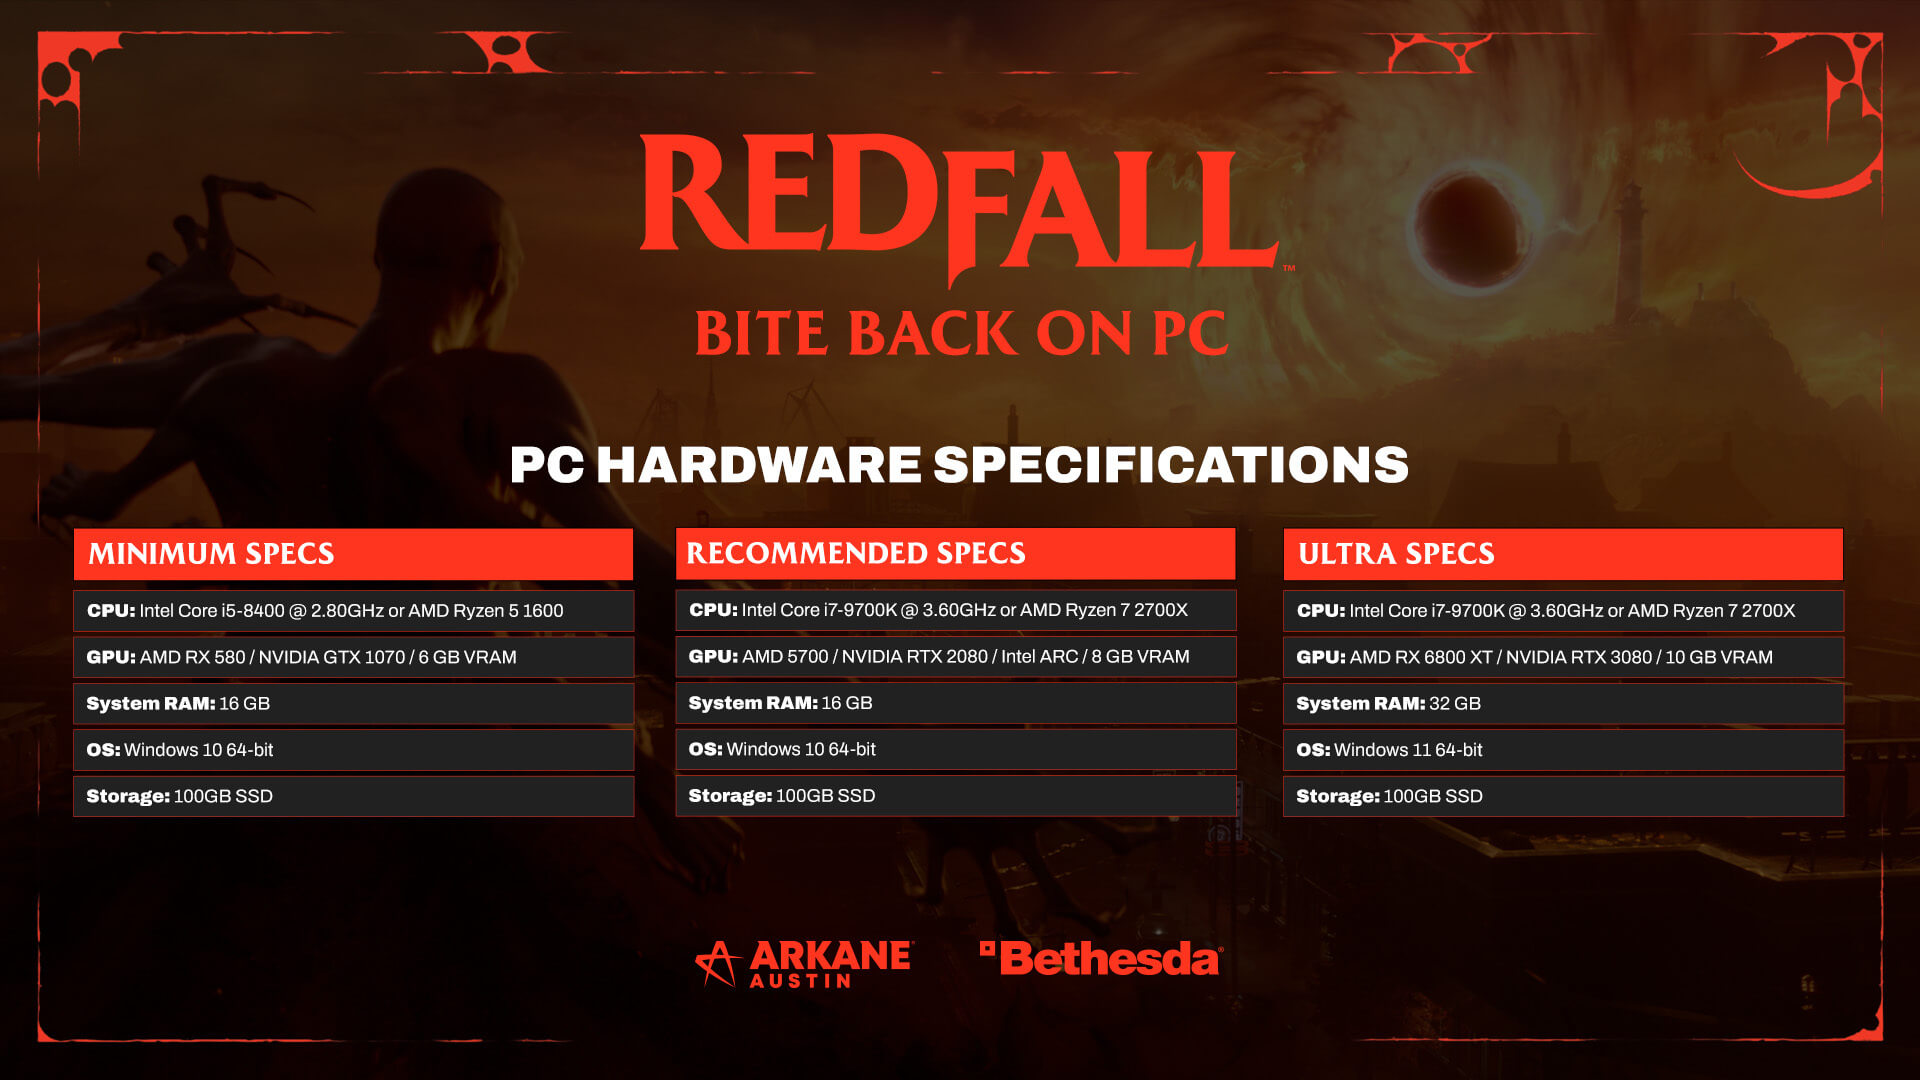 Redfall PC requirements